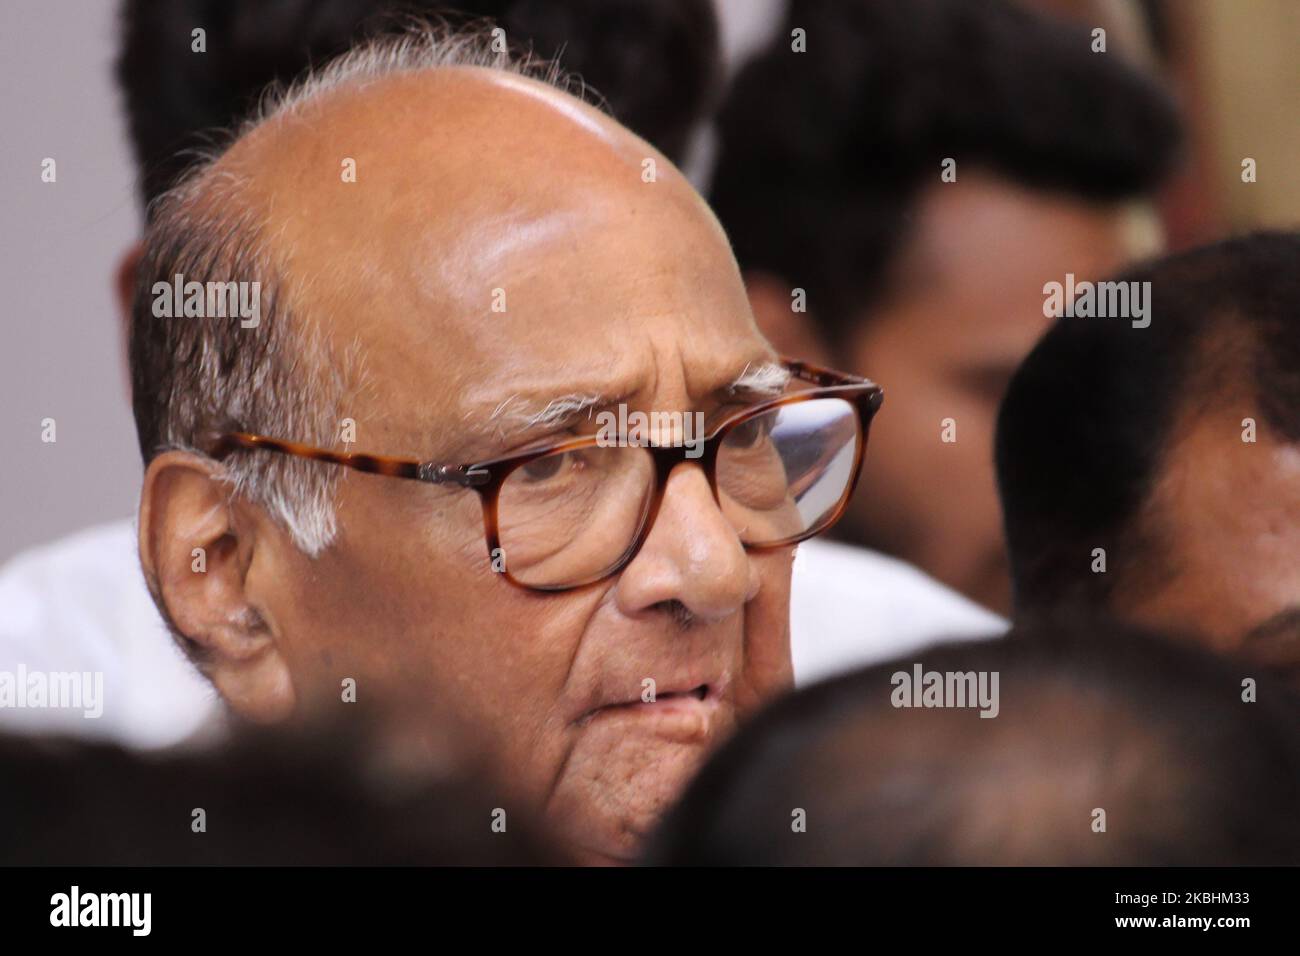 The Nationalist Congress Party (NCP) chief Sharad Pawar leaves after an event on February 23, 2020 in Mumbai, India. (Photo by Himanshu Bhatt/NurPhoto) Stock Photo